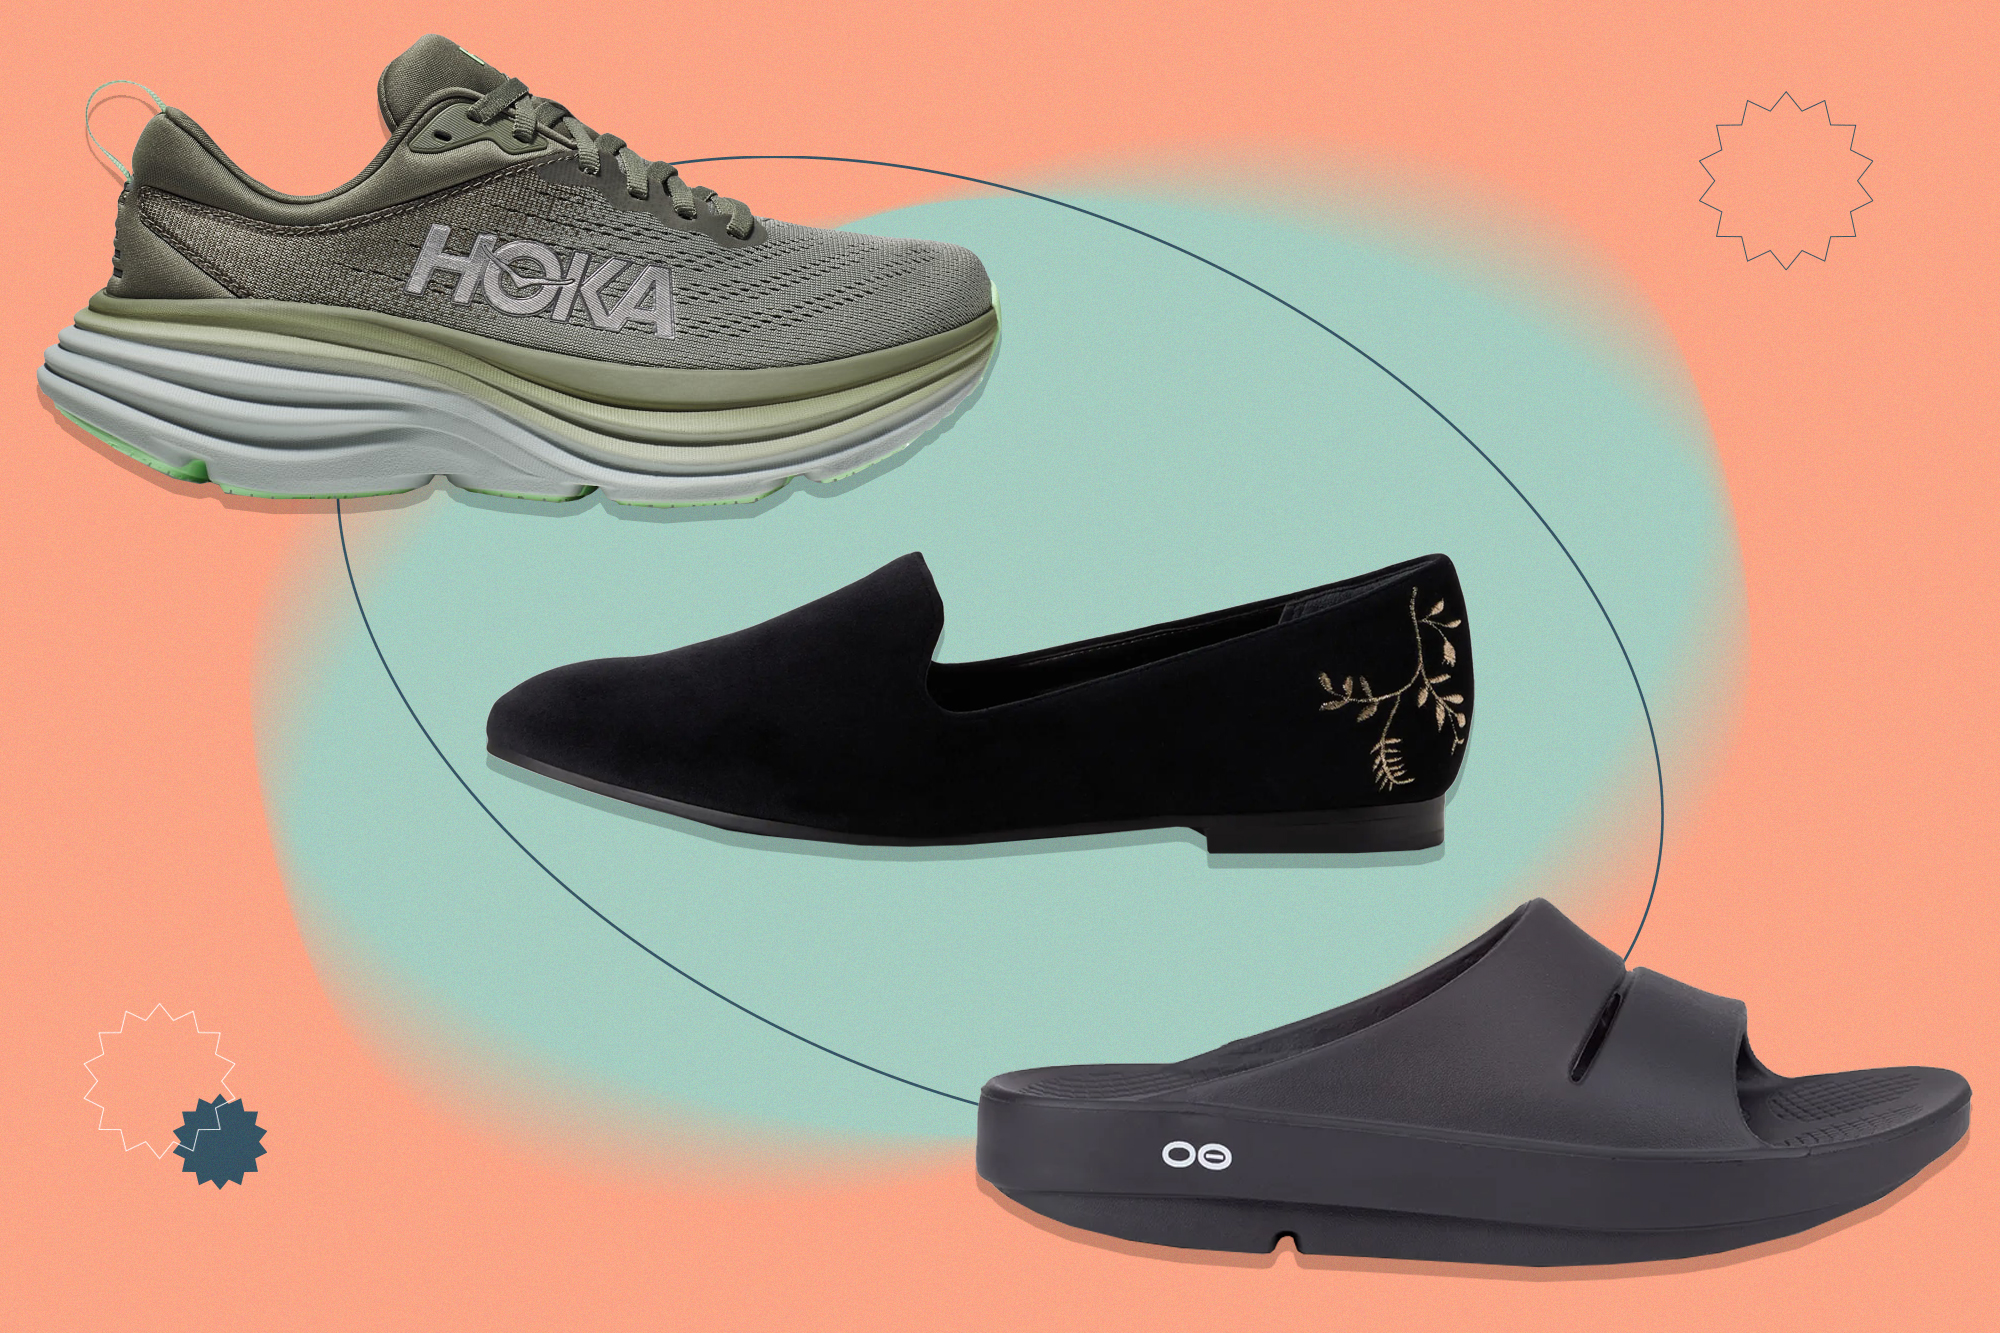 The 10 Best Shoes for Plantar Fasciitis, According to a Podiatrist